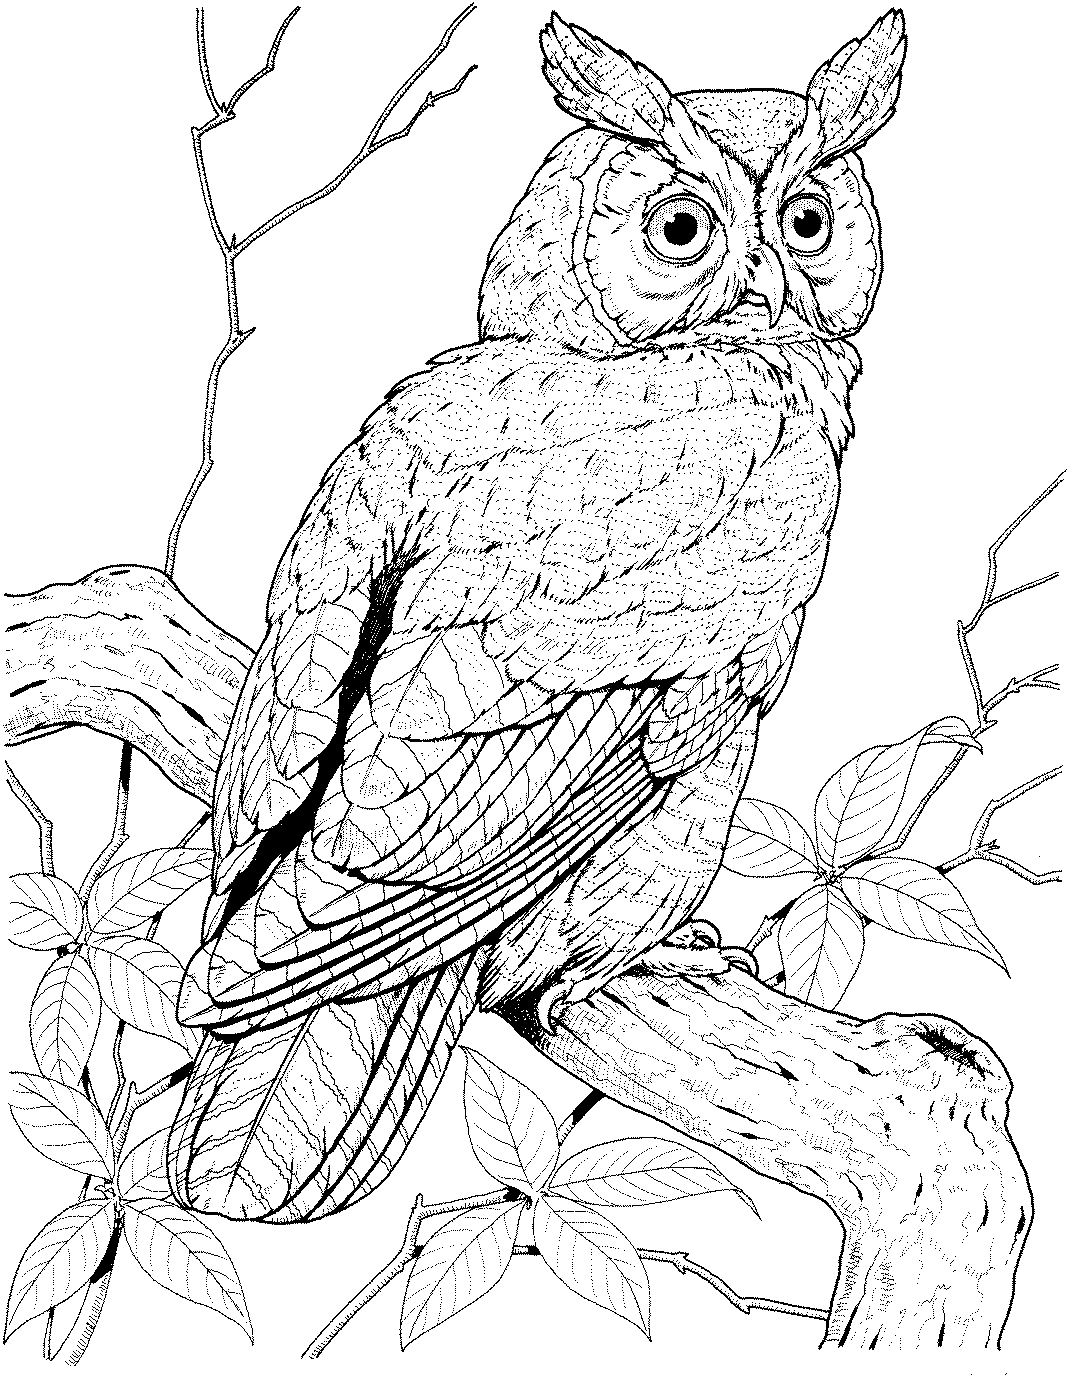 Owl Coloring Pages | Owl Coloring Pages